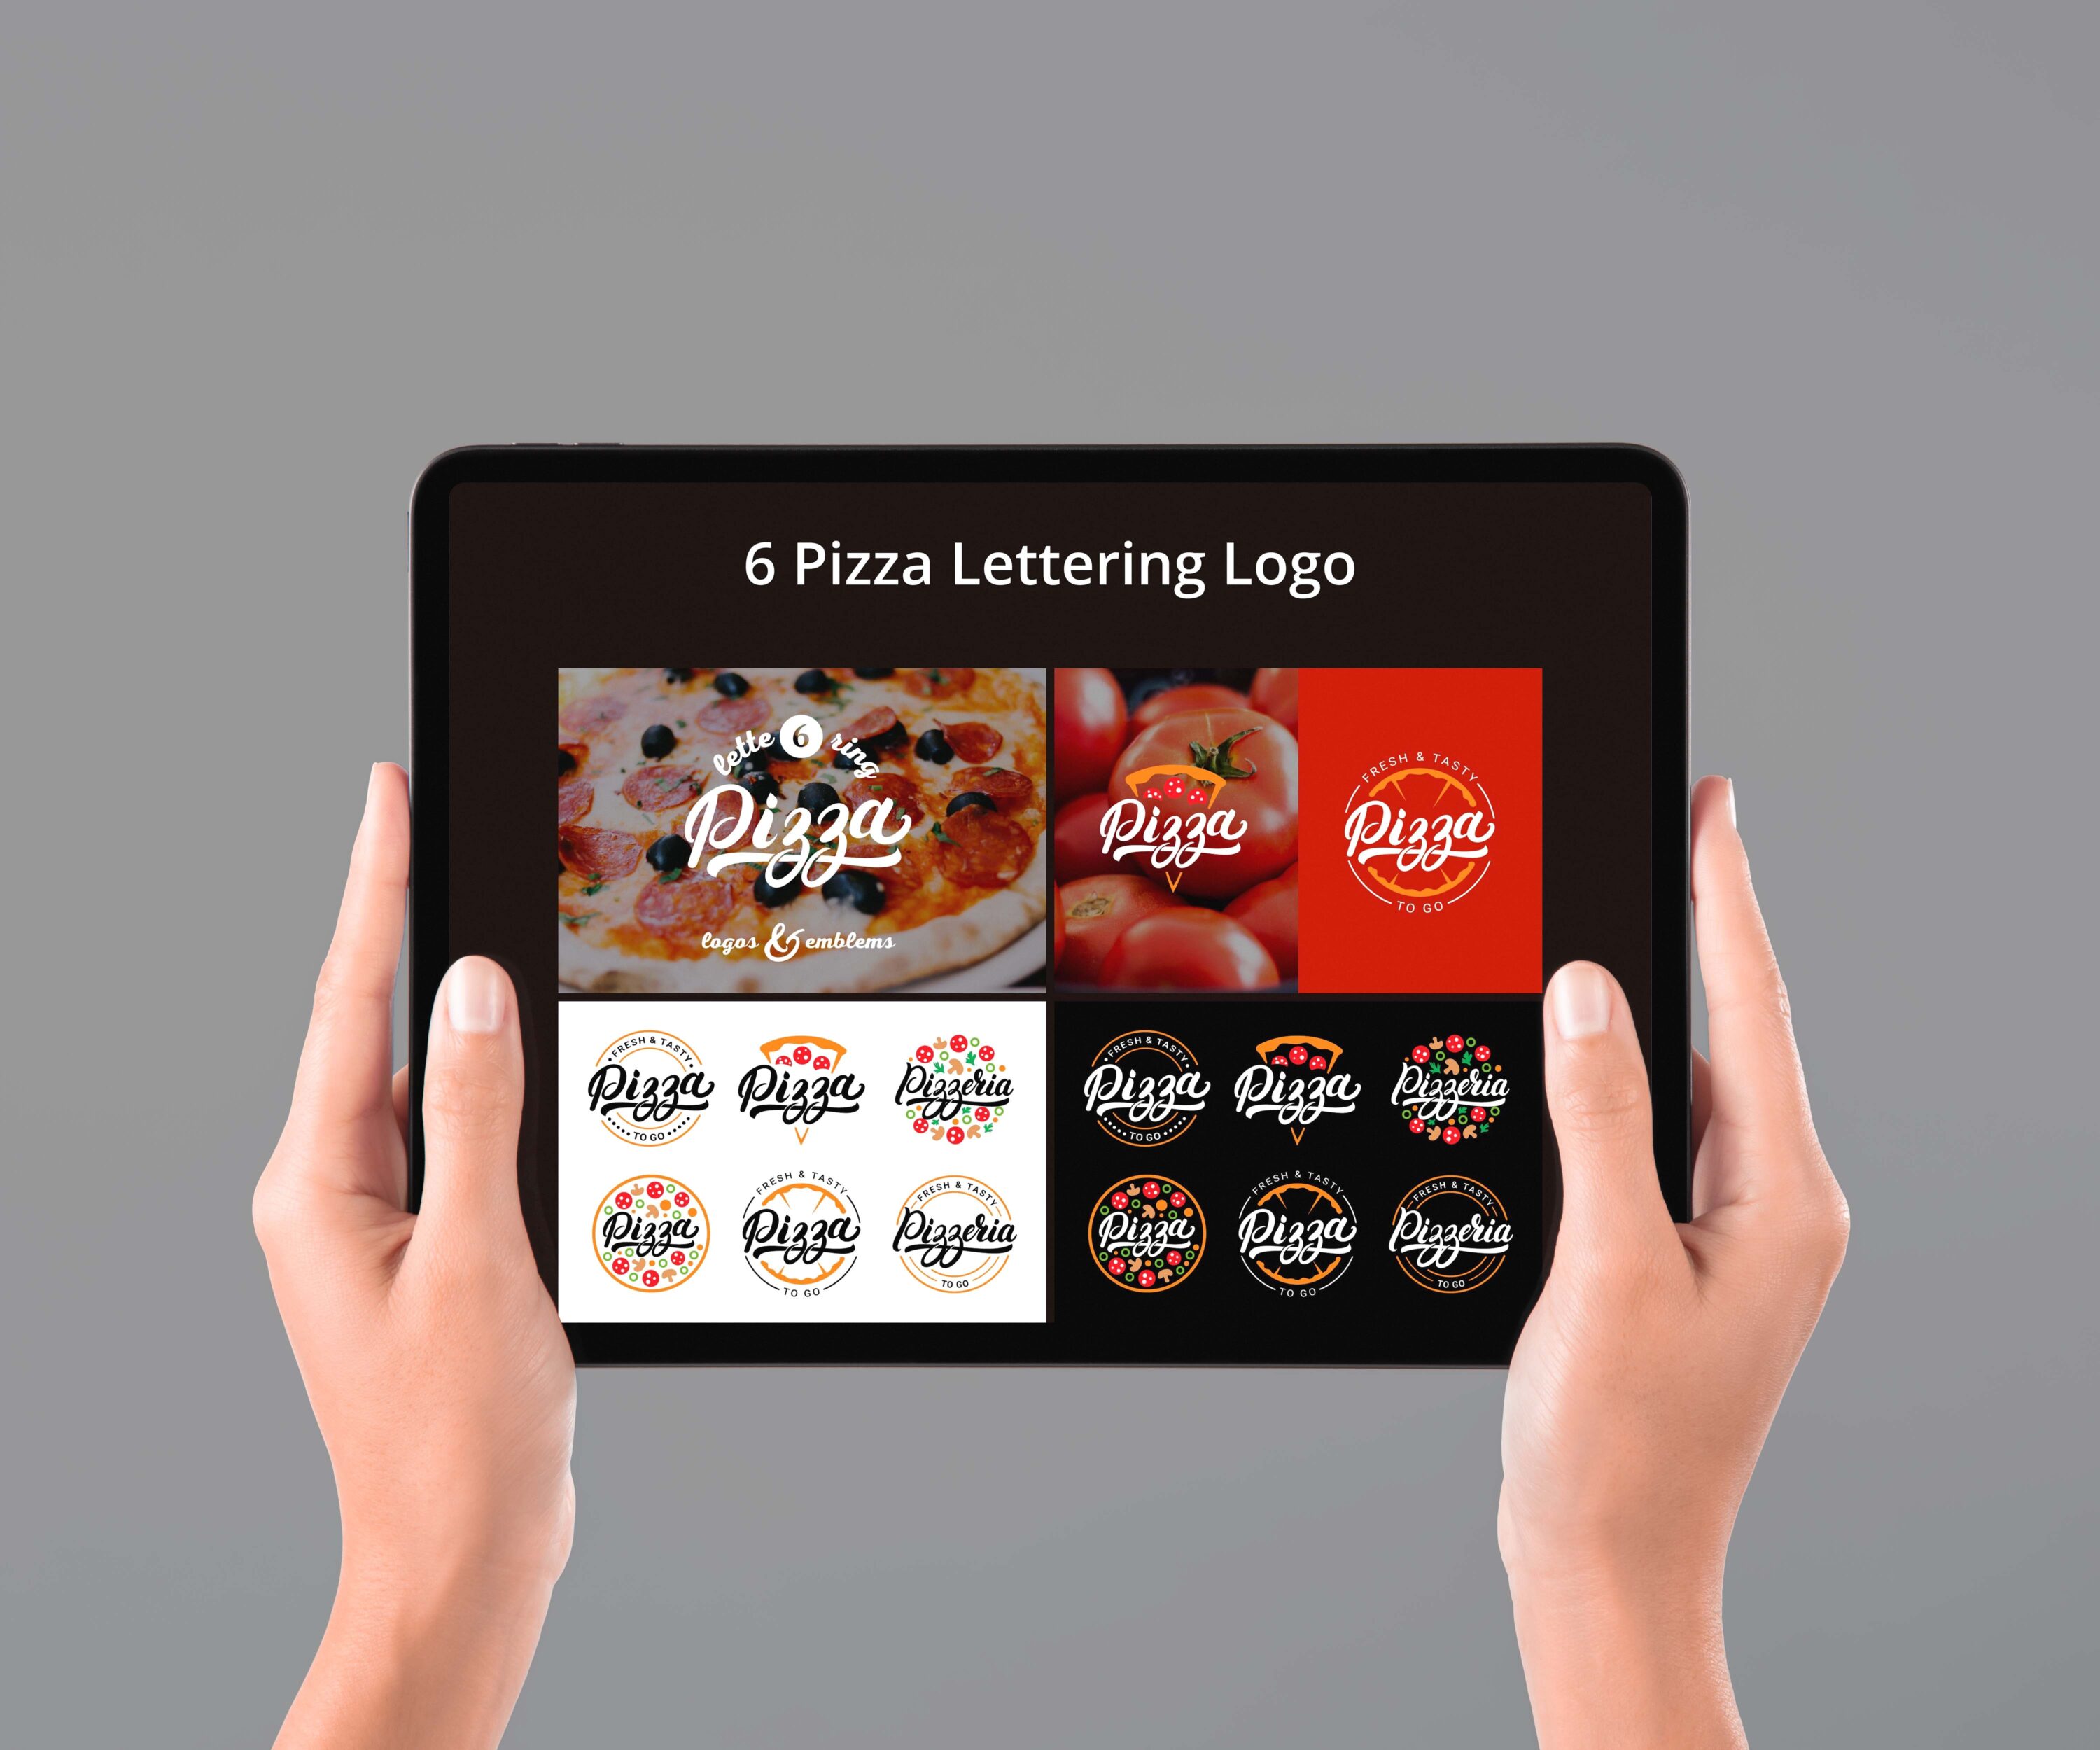 6 Pizza Lettering Logo tablet preview.